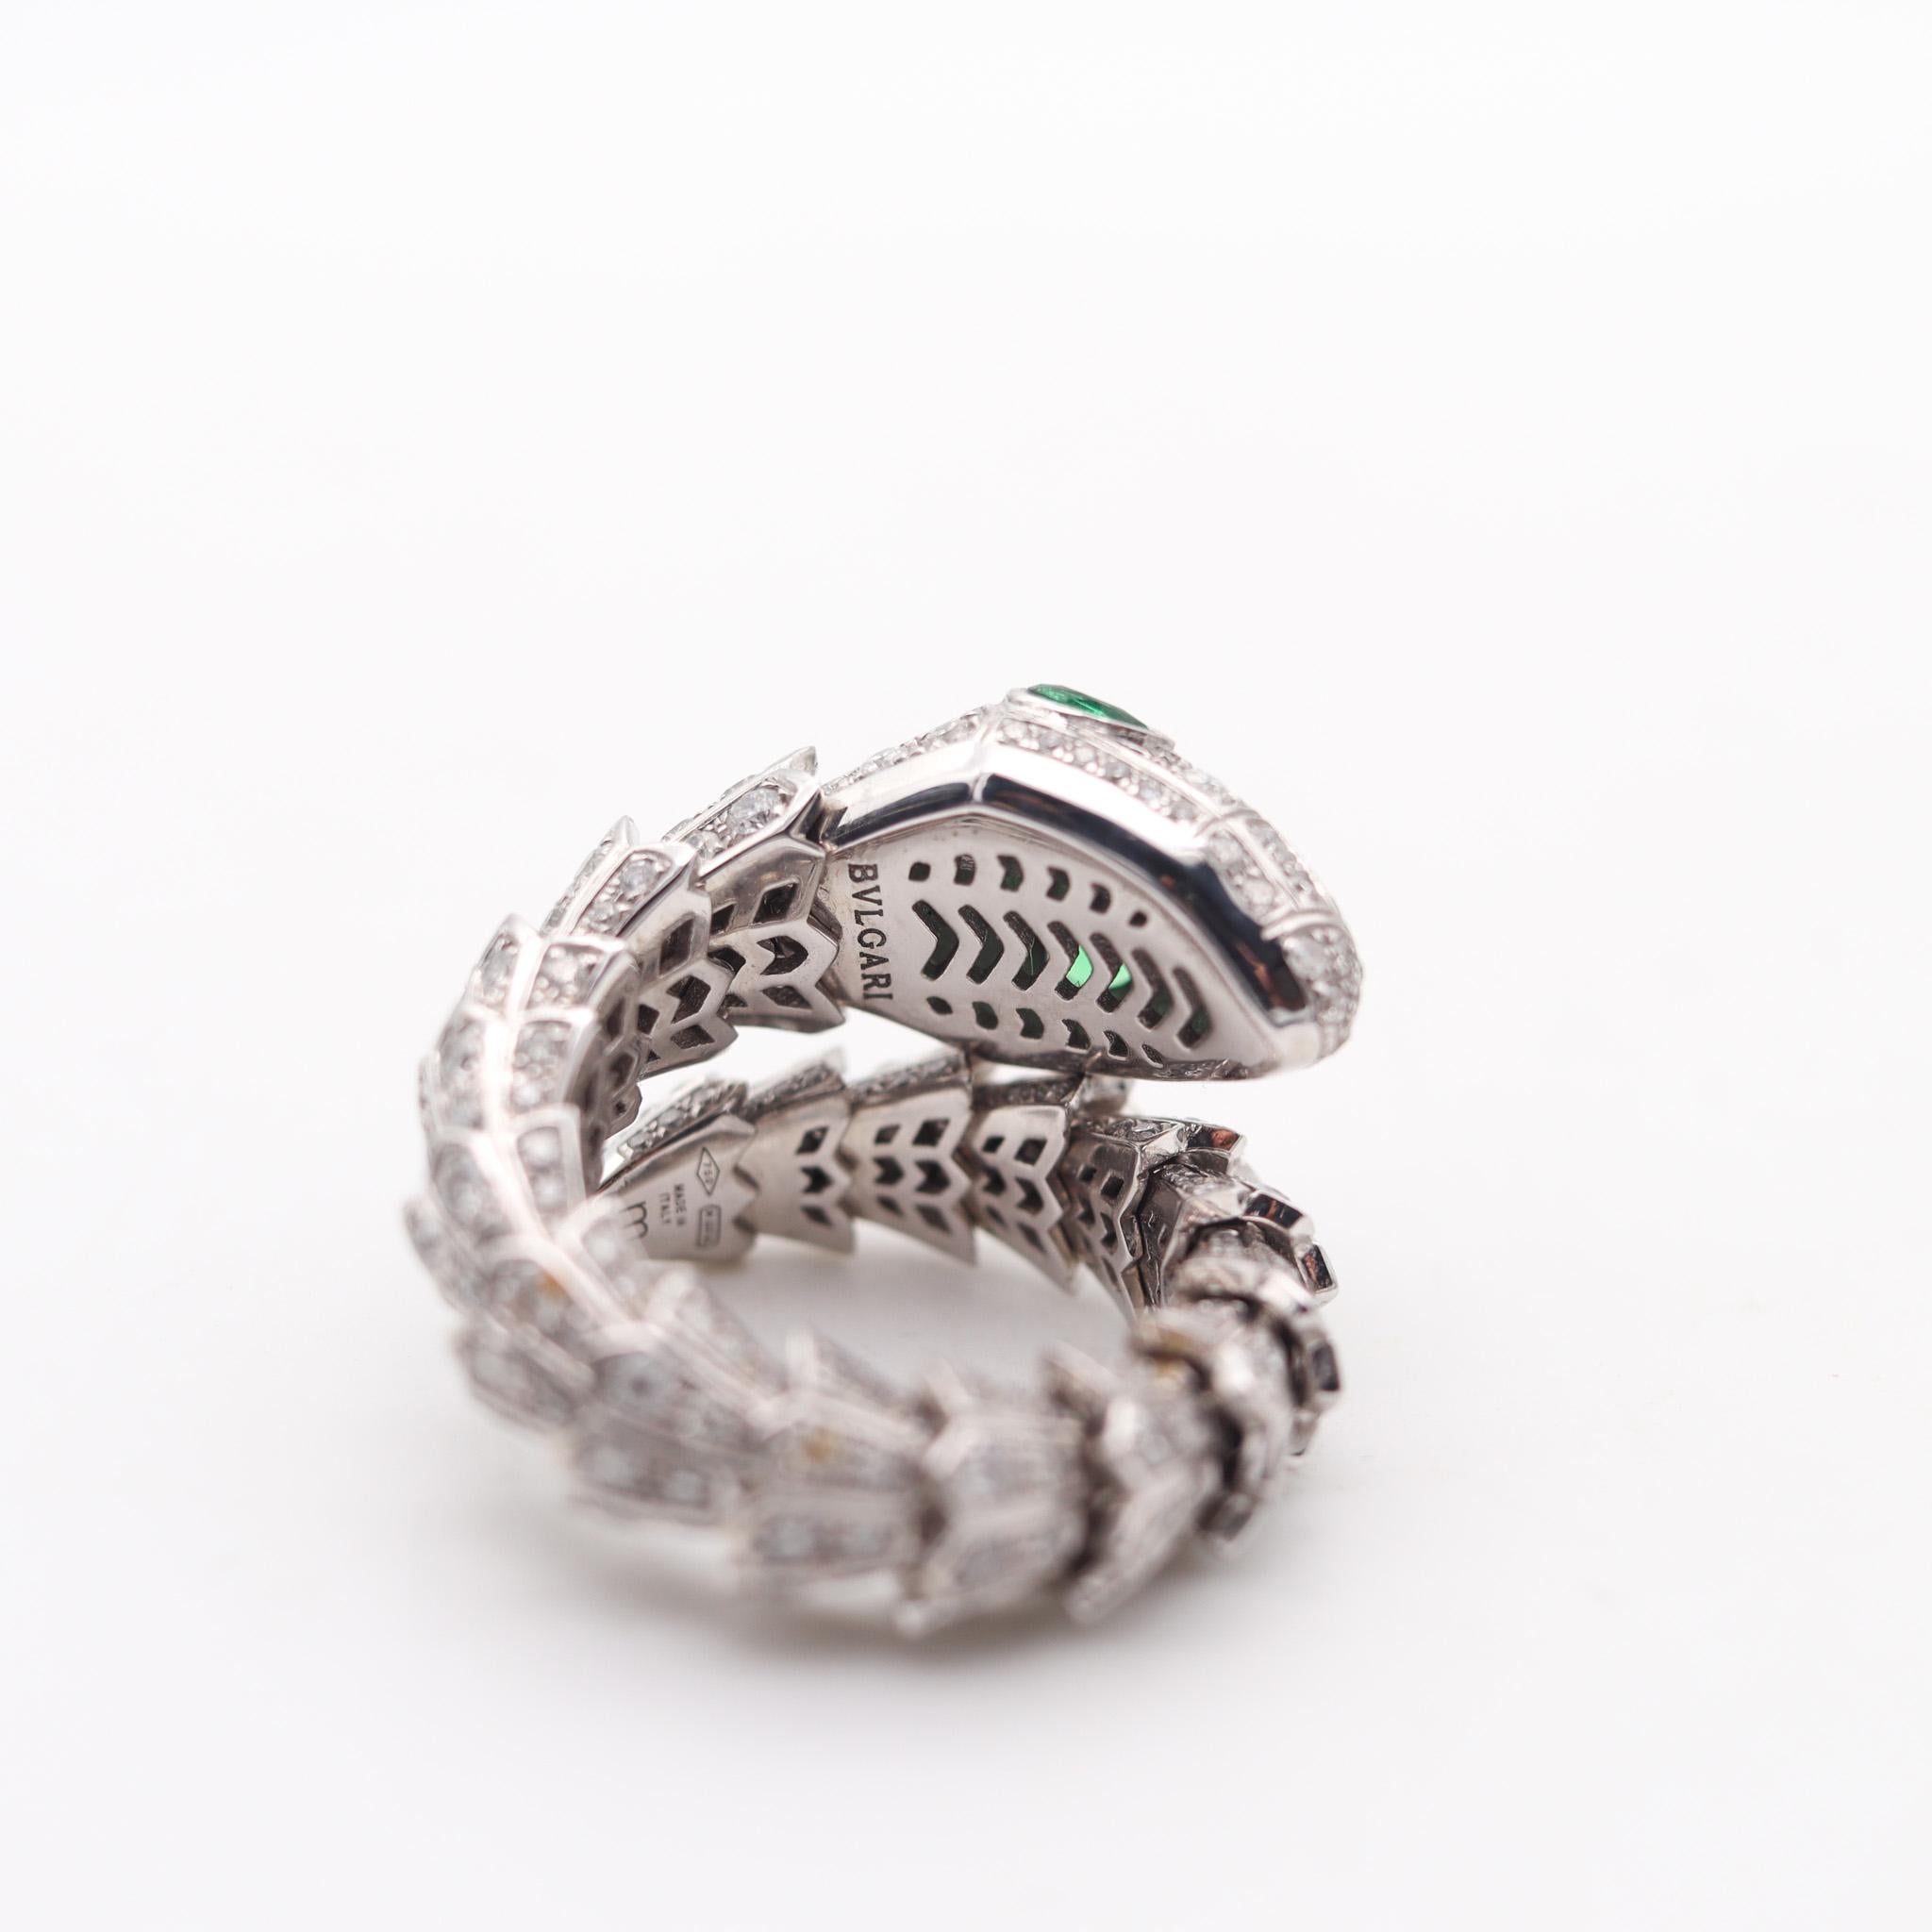 Brilliant Cut Bvlgari Roma Serpenti Ring In 18Kt Gold With 7.36 Ctw In Diamonds And Emerald For Sale